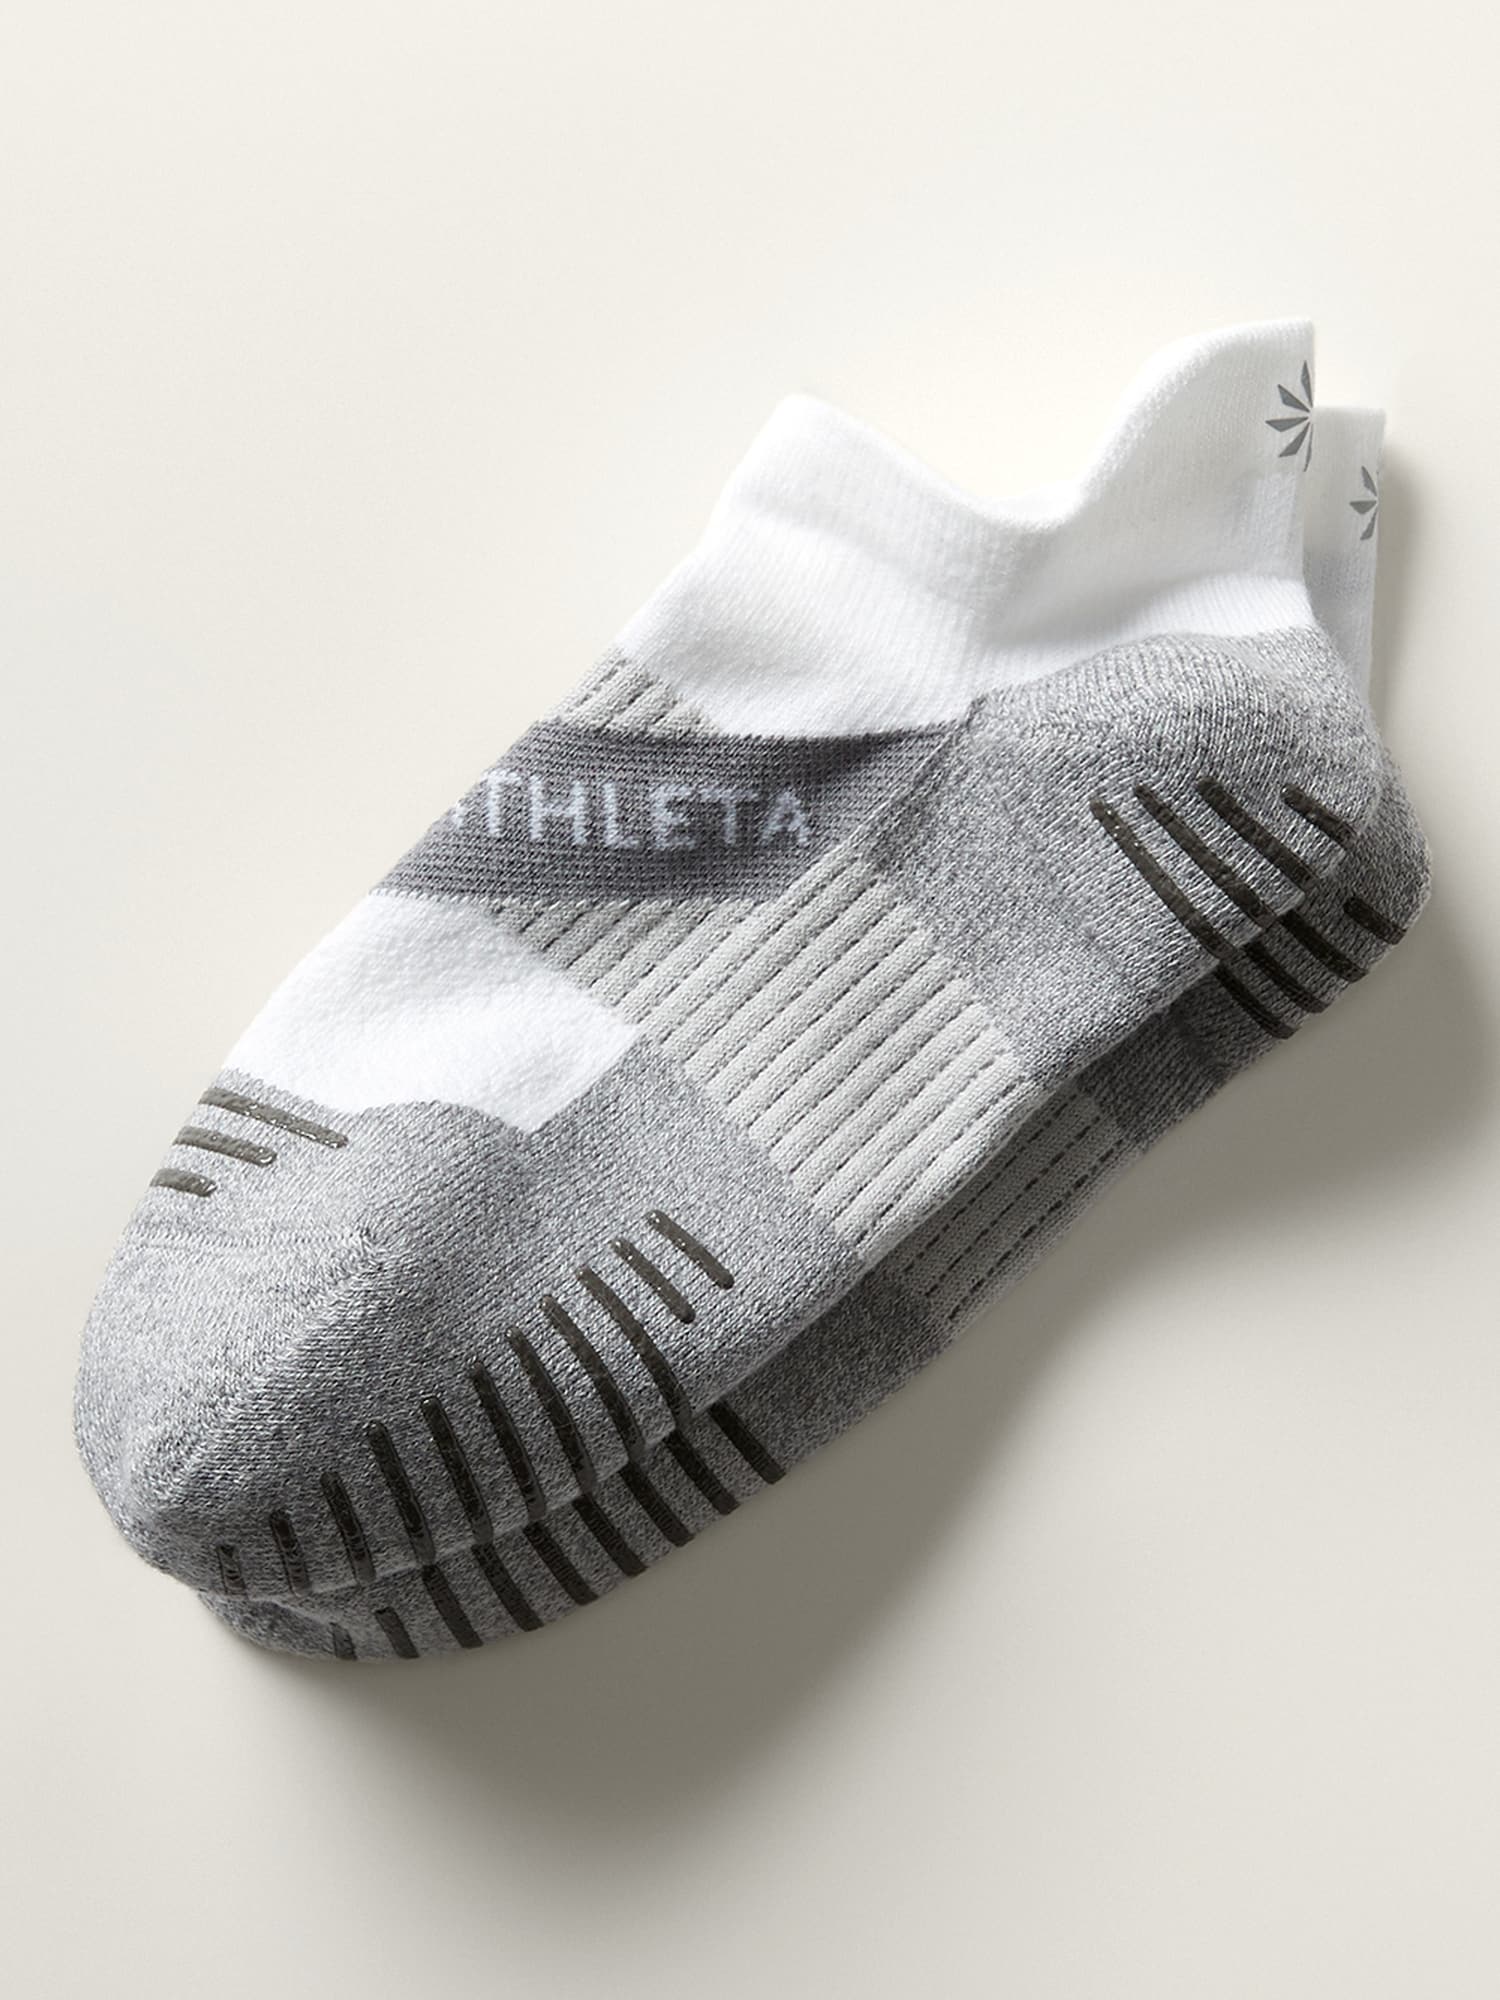 Grip socks for pilates can cost double or triple what regular socks co